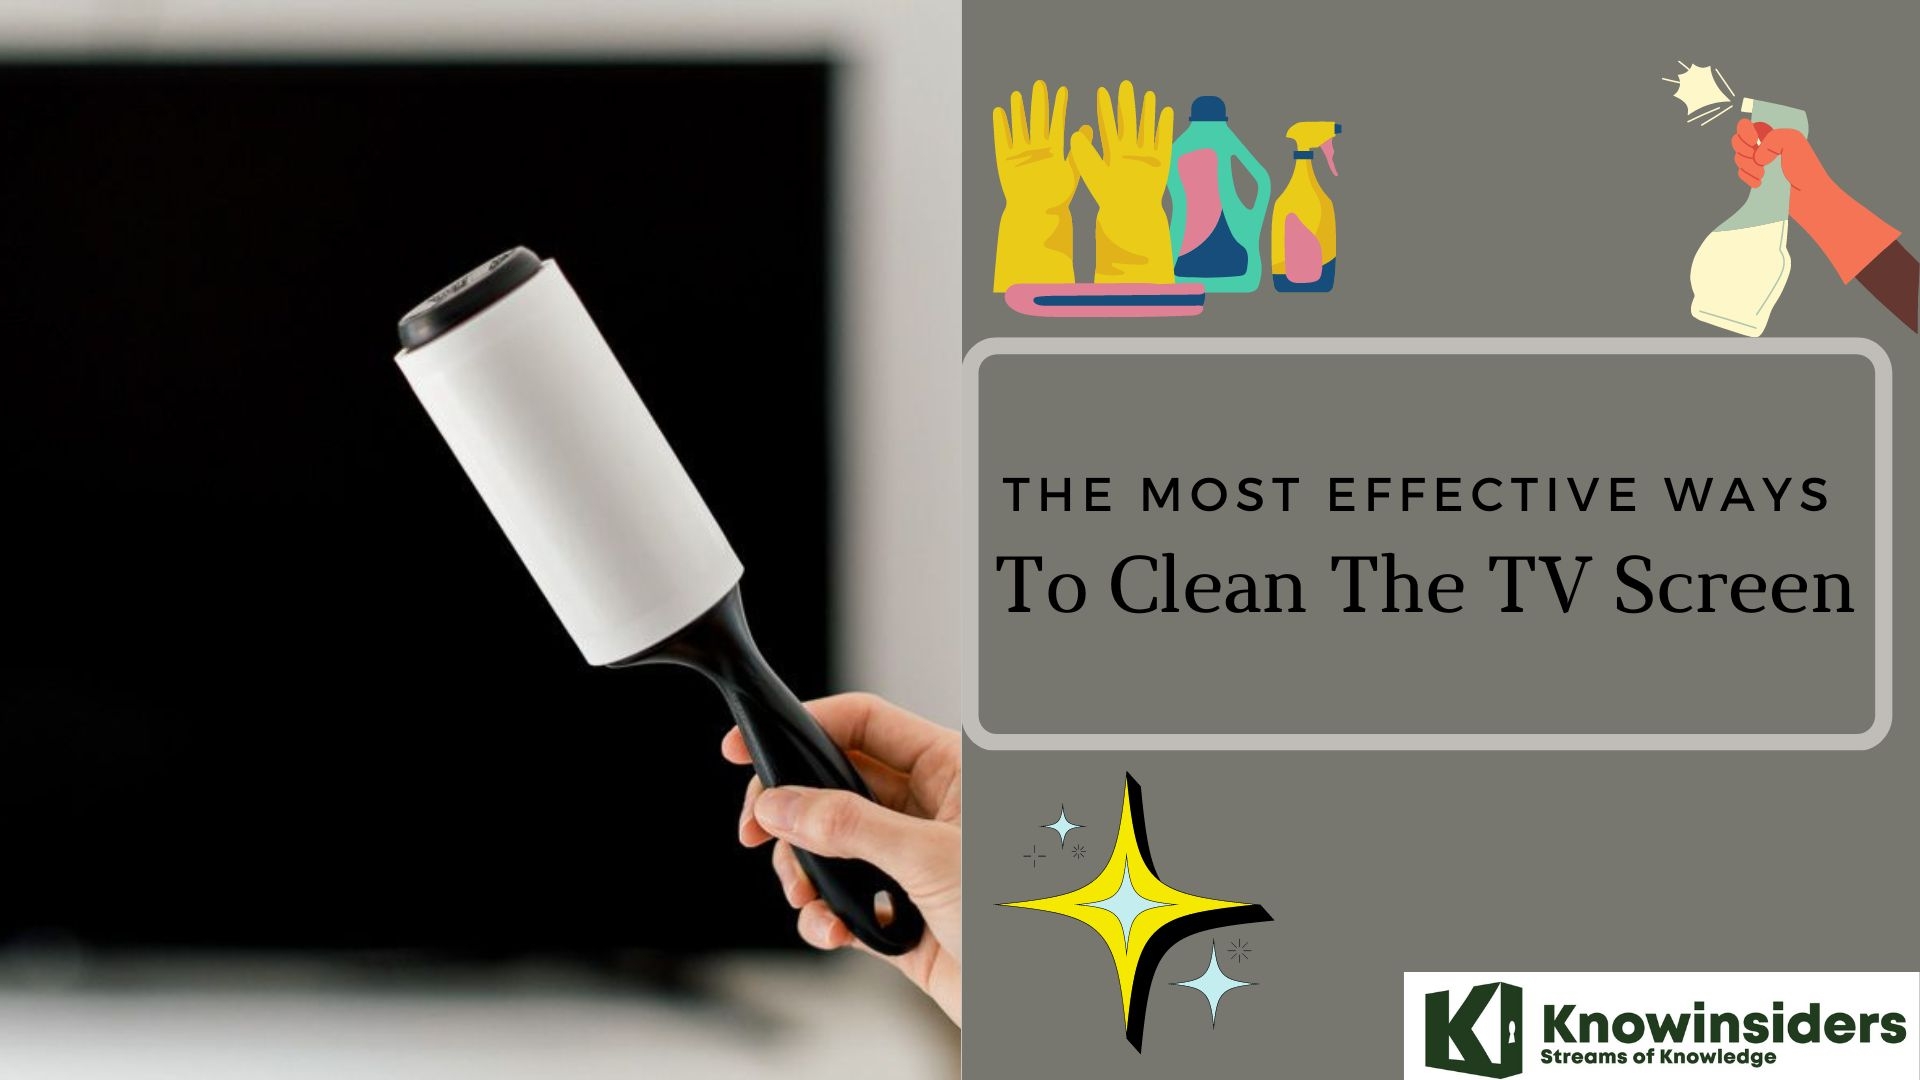 Simple Guide: The Most Effective Ways To Clean The TV Screen Knowinsiders.com